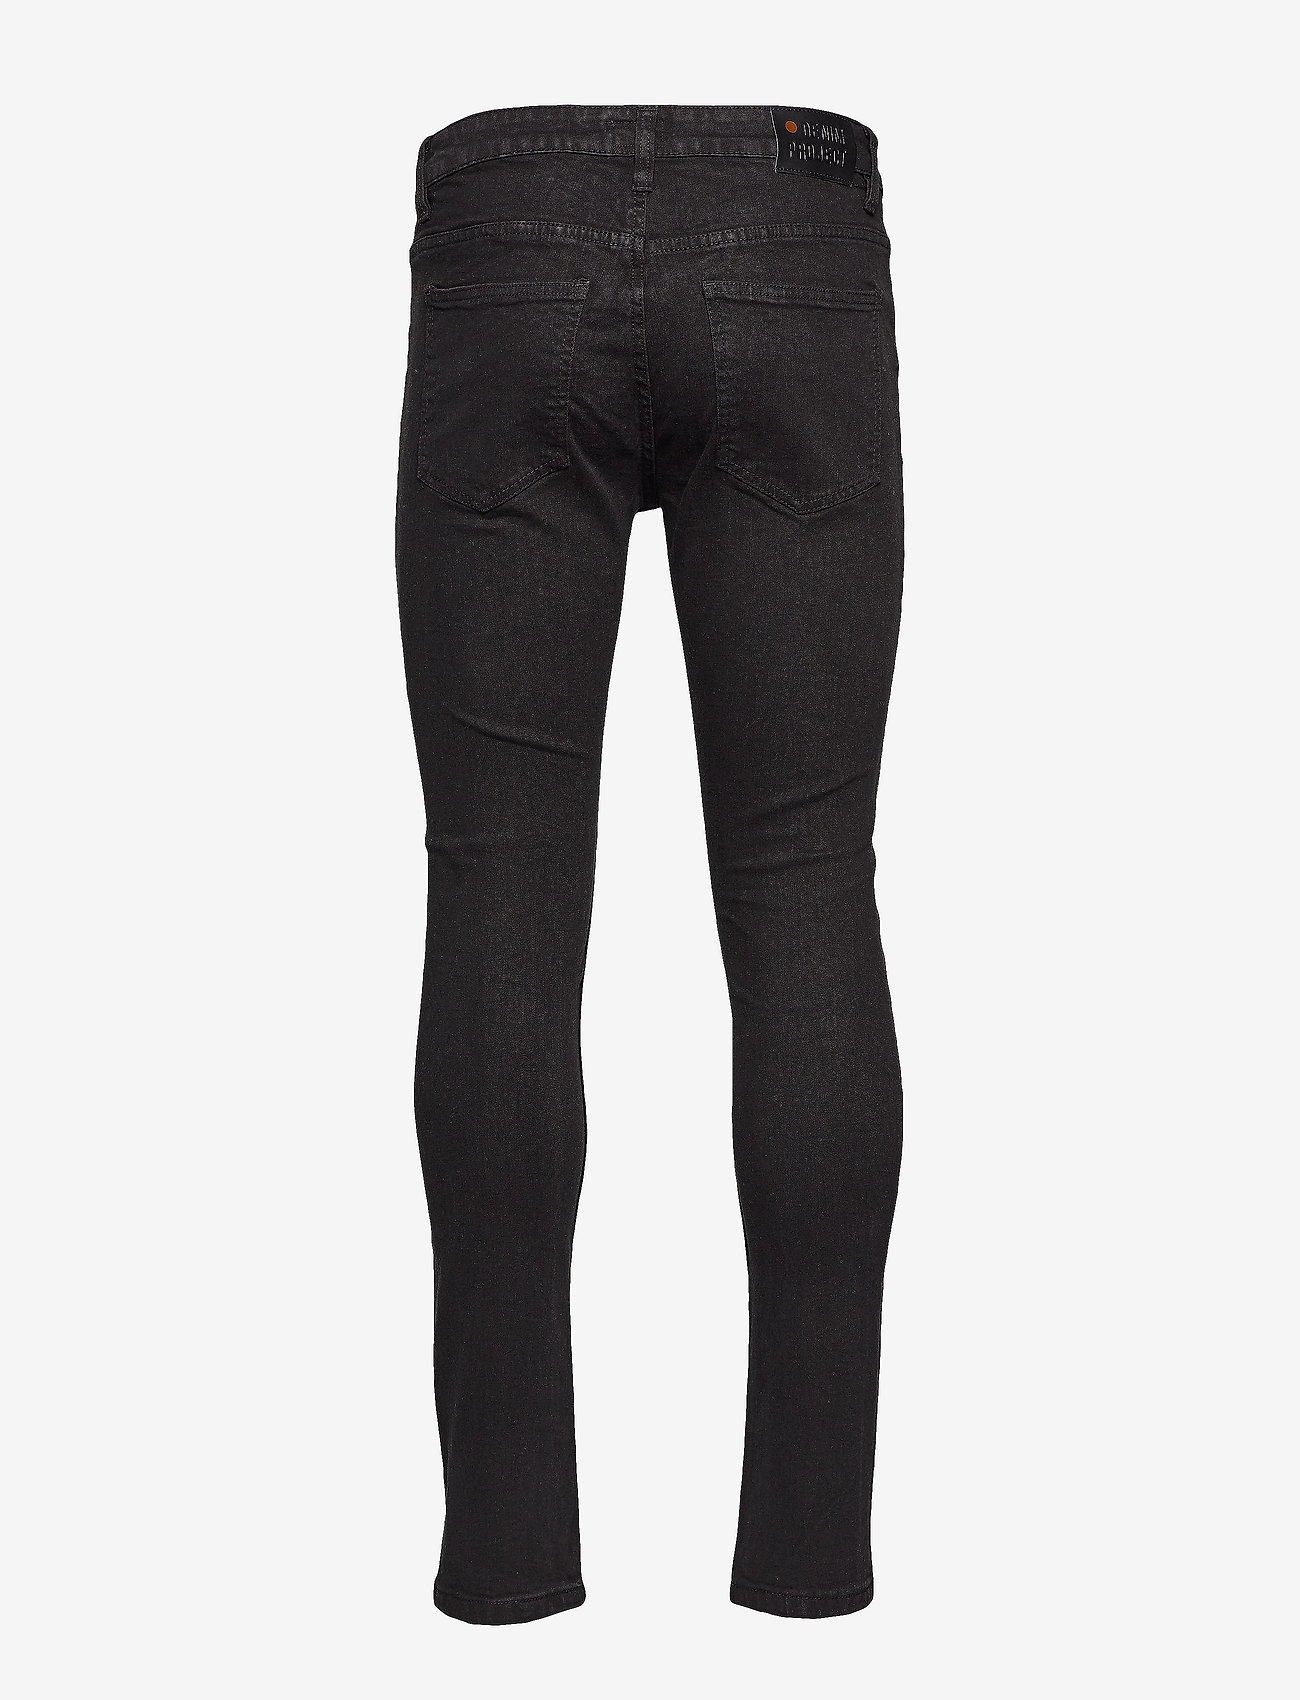 Denim project - Mr. Red - lowest prices - black - 1